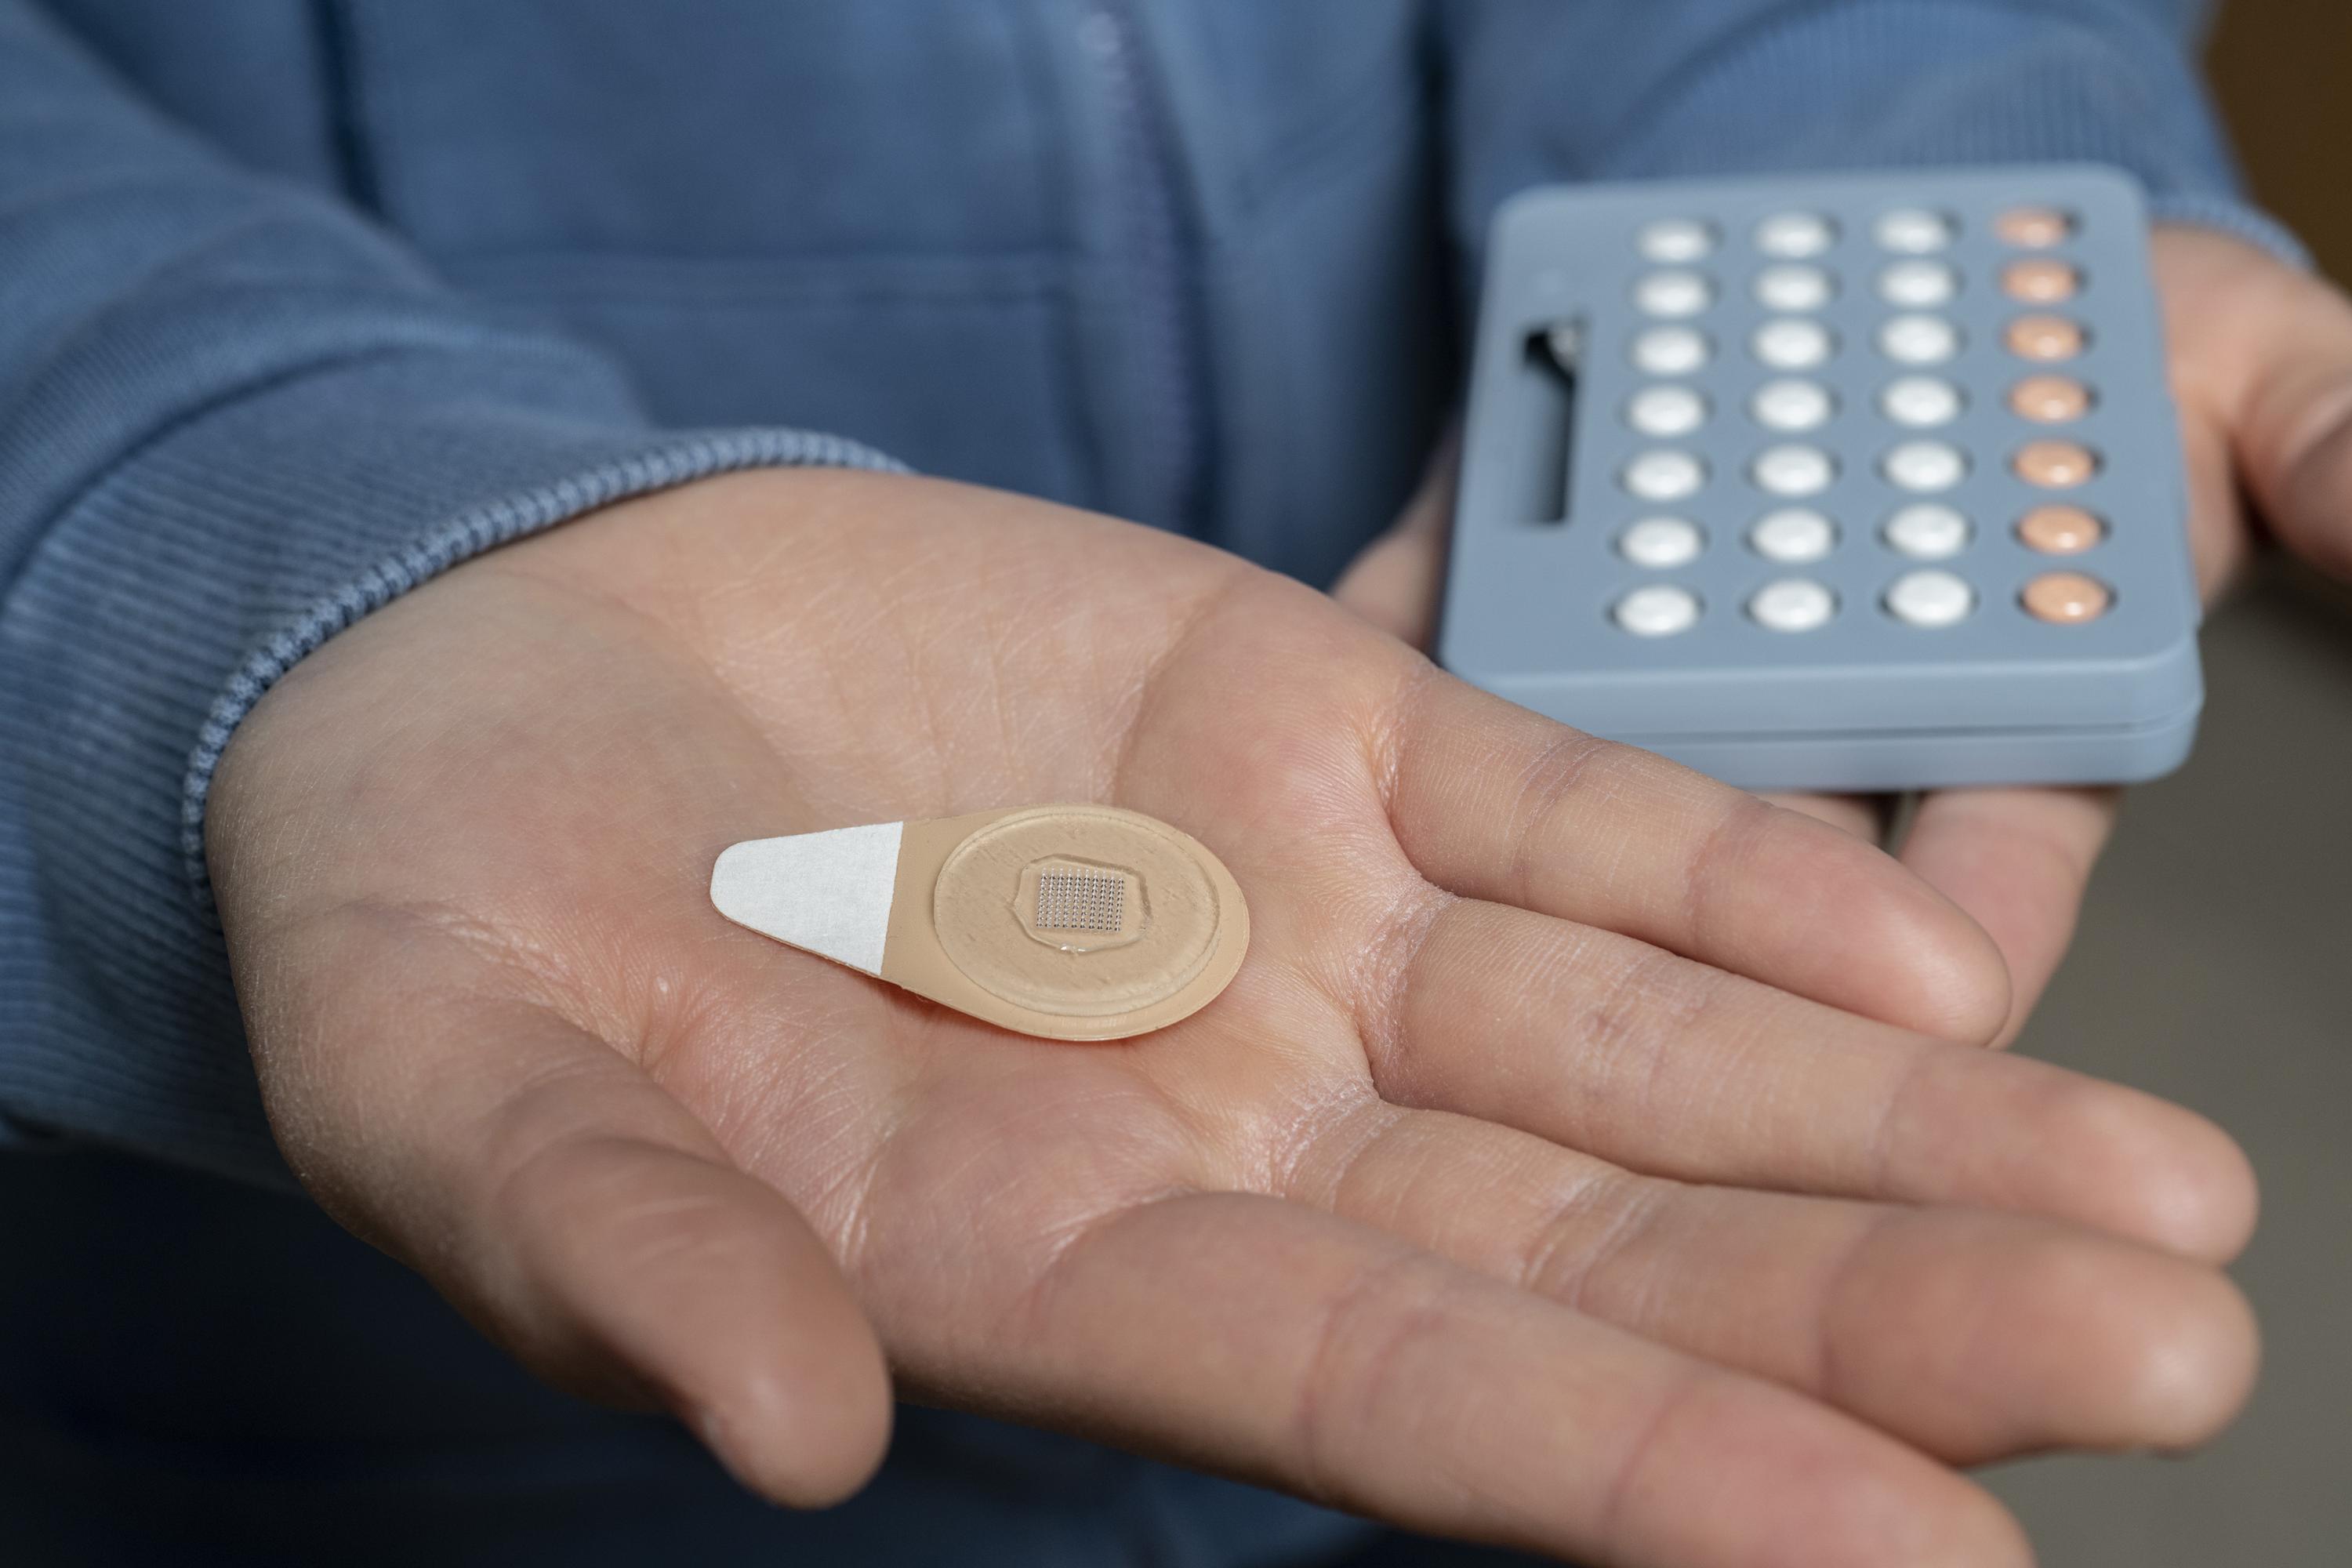 An experimental microneedle patch is shown next to a blister pack of birth control pills. Designed to be self-administered by women for long-acting contraception, the patch could provide a new family planning option. (Credit: Christopher Moore, Georgia Tech)